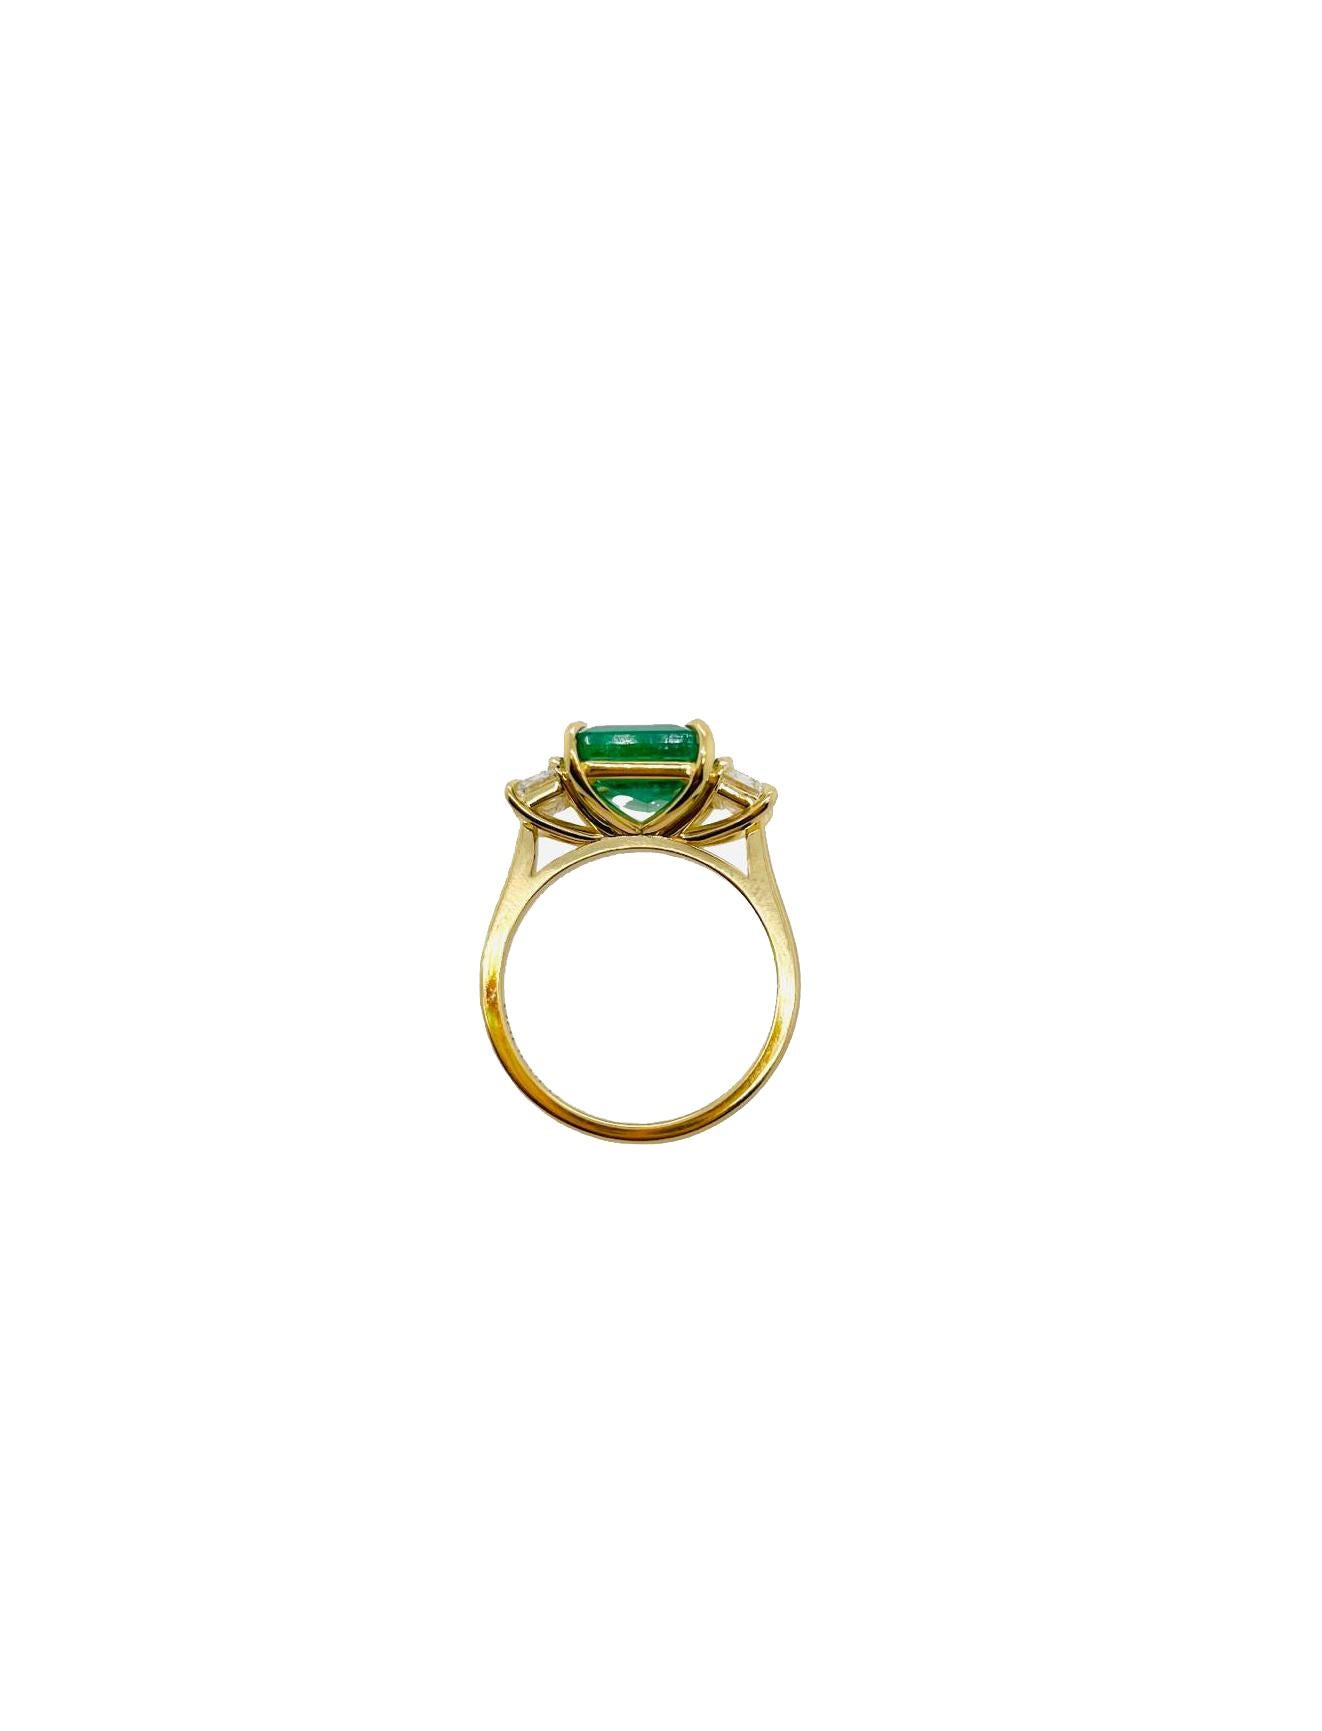 For Sale:  Custom made 3.50ct Emerald and diamond Trilogy style ring in 18ct yellow gold  3